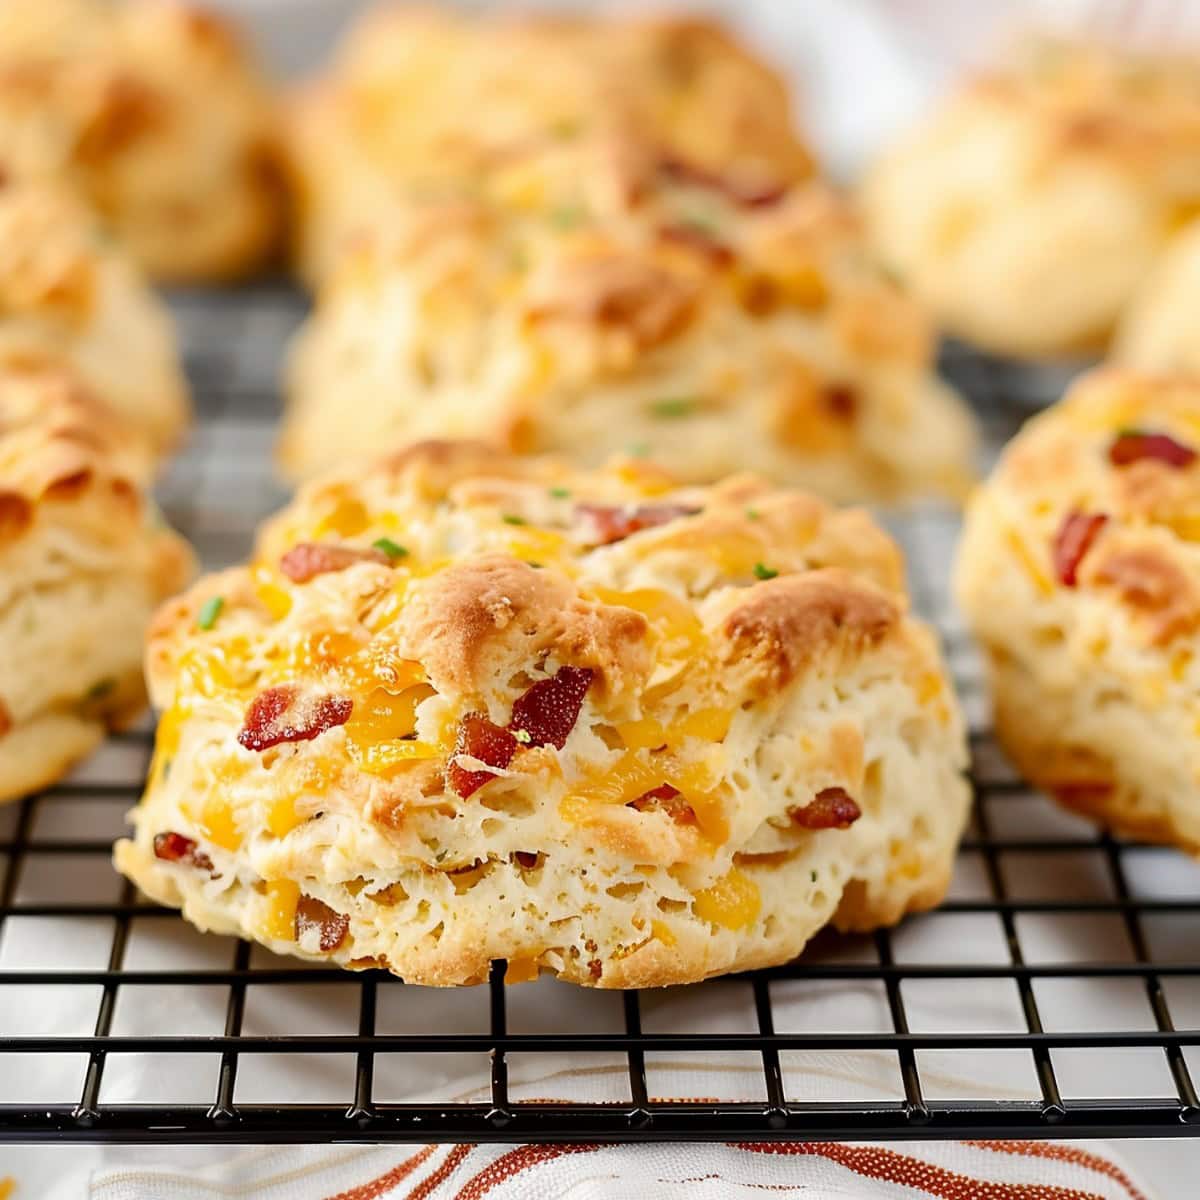 Bacon cheddar biscuits with chives on a cooling rack